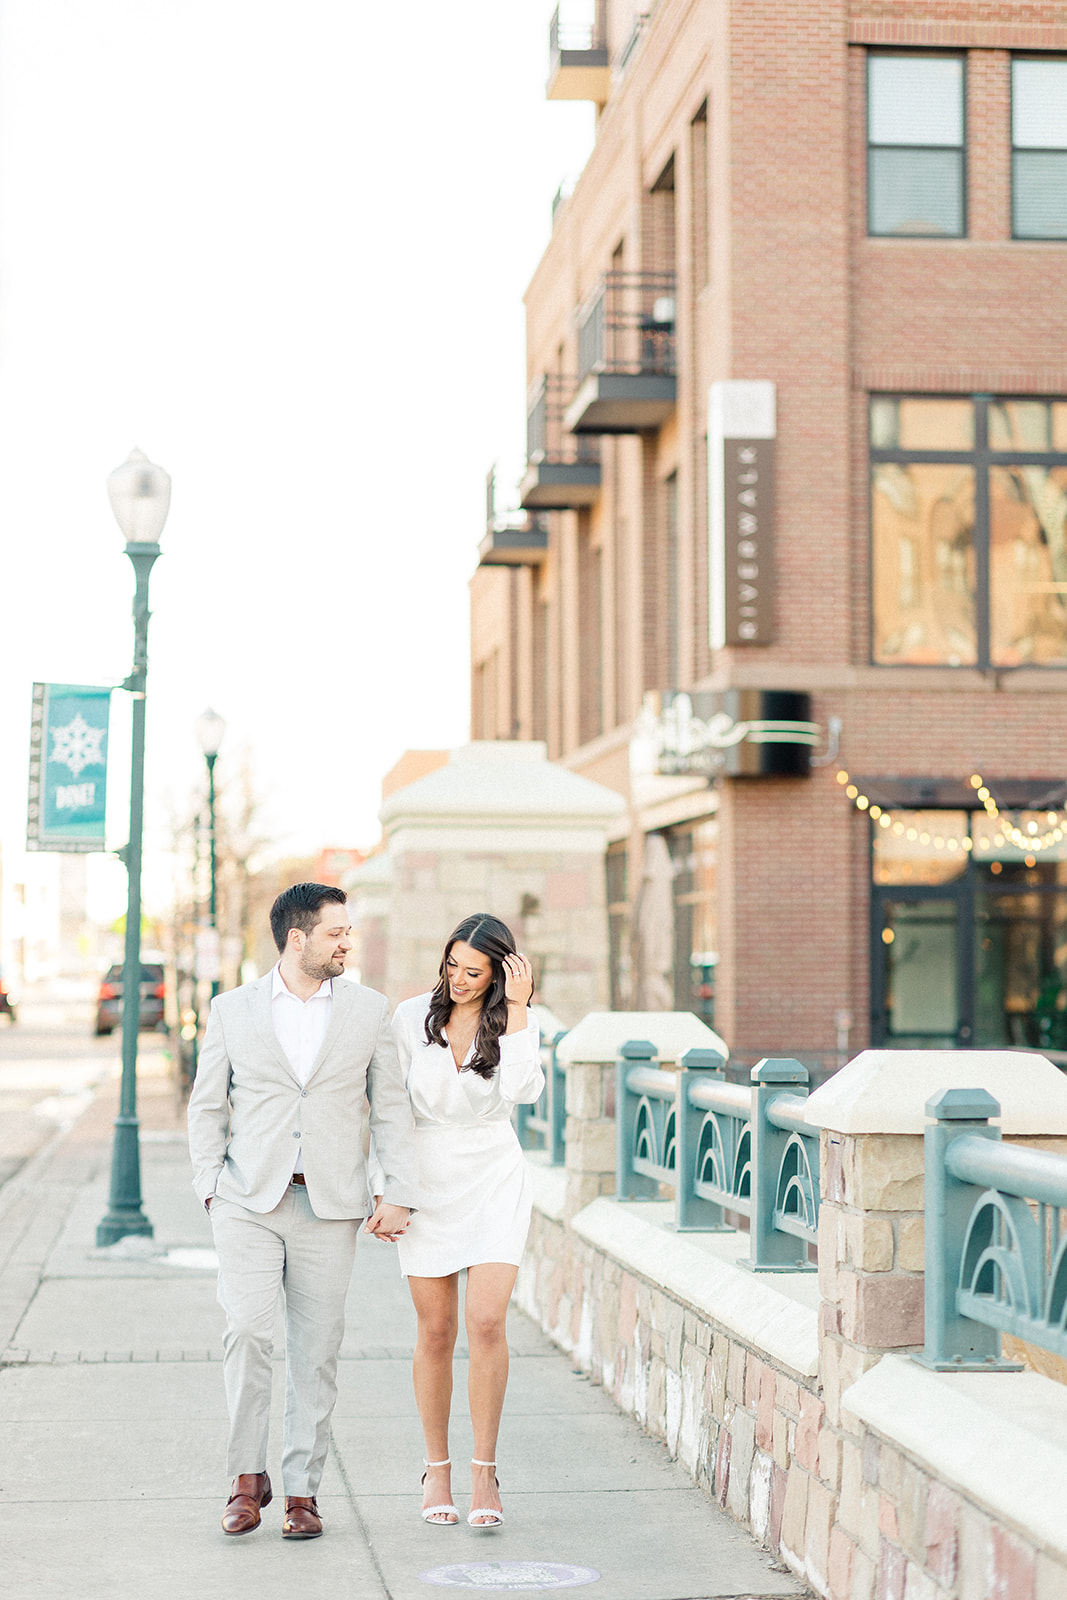 Couple walking down street in Castle Rock for engagement photos